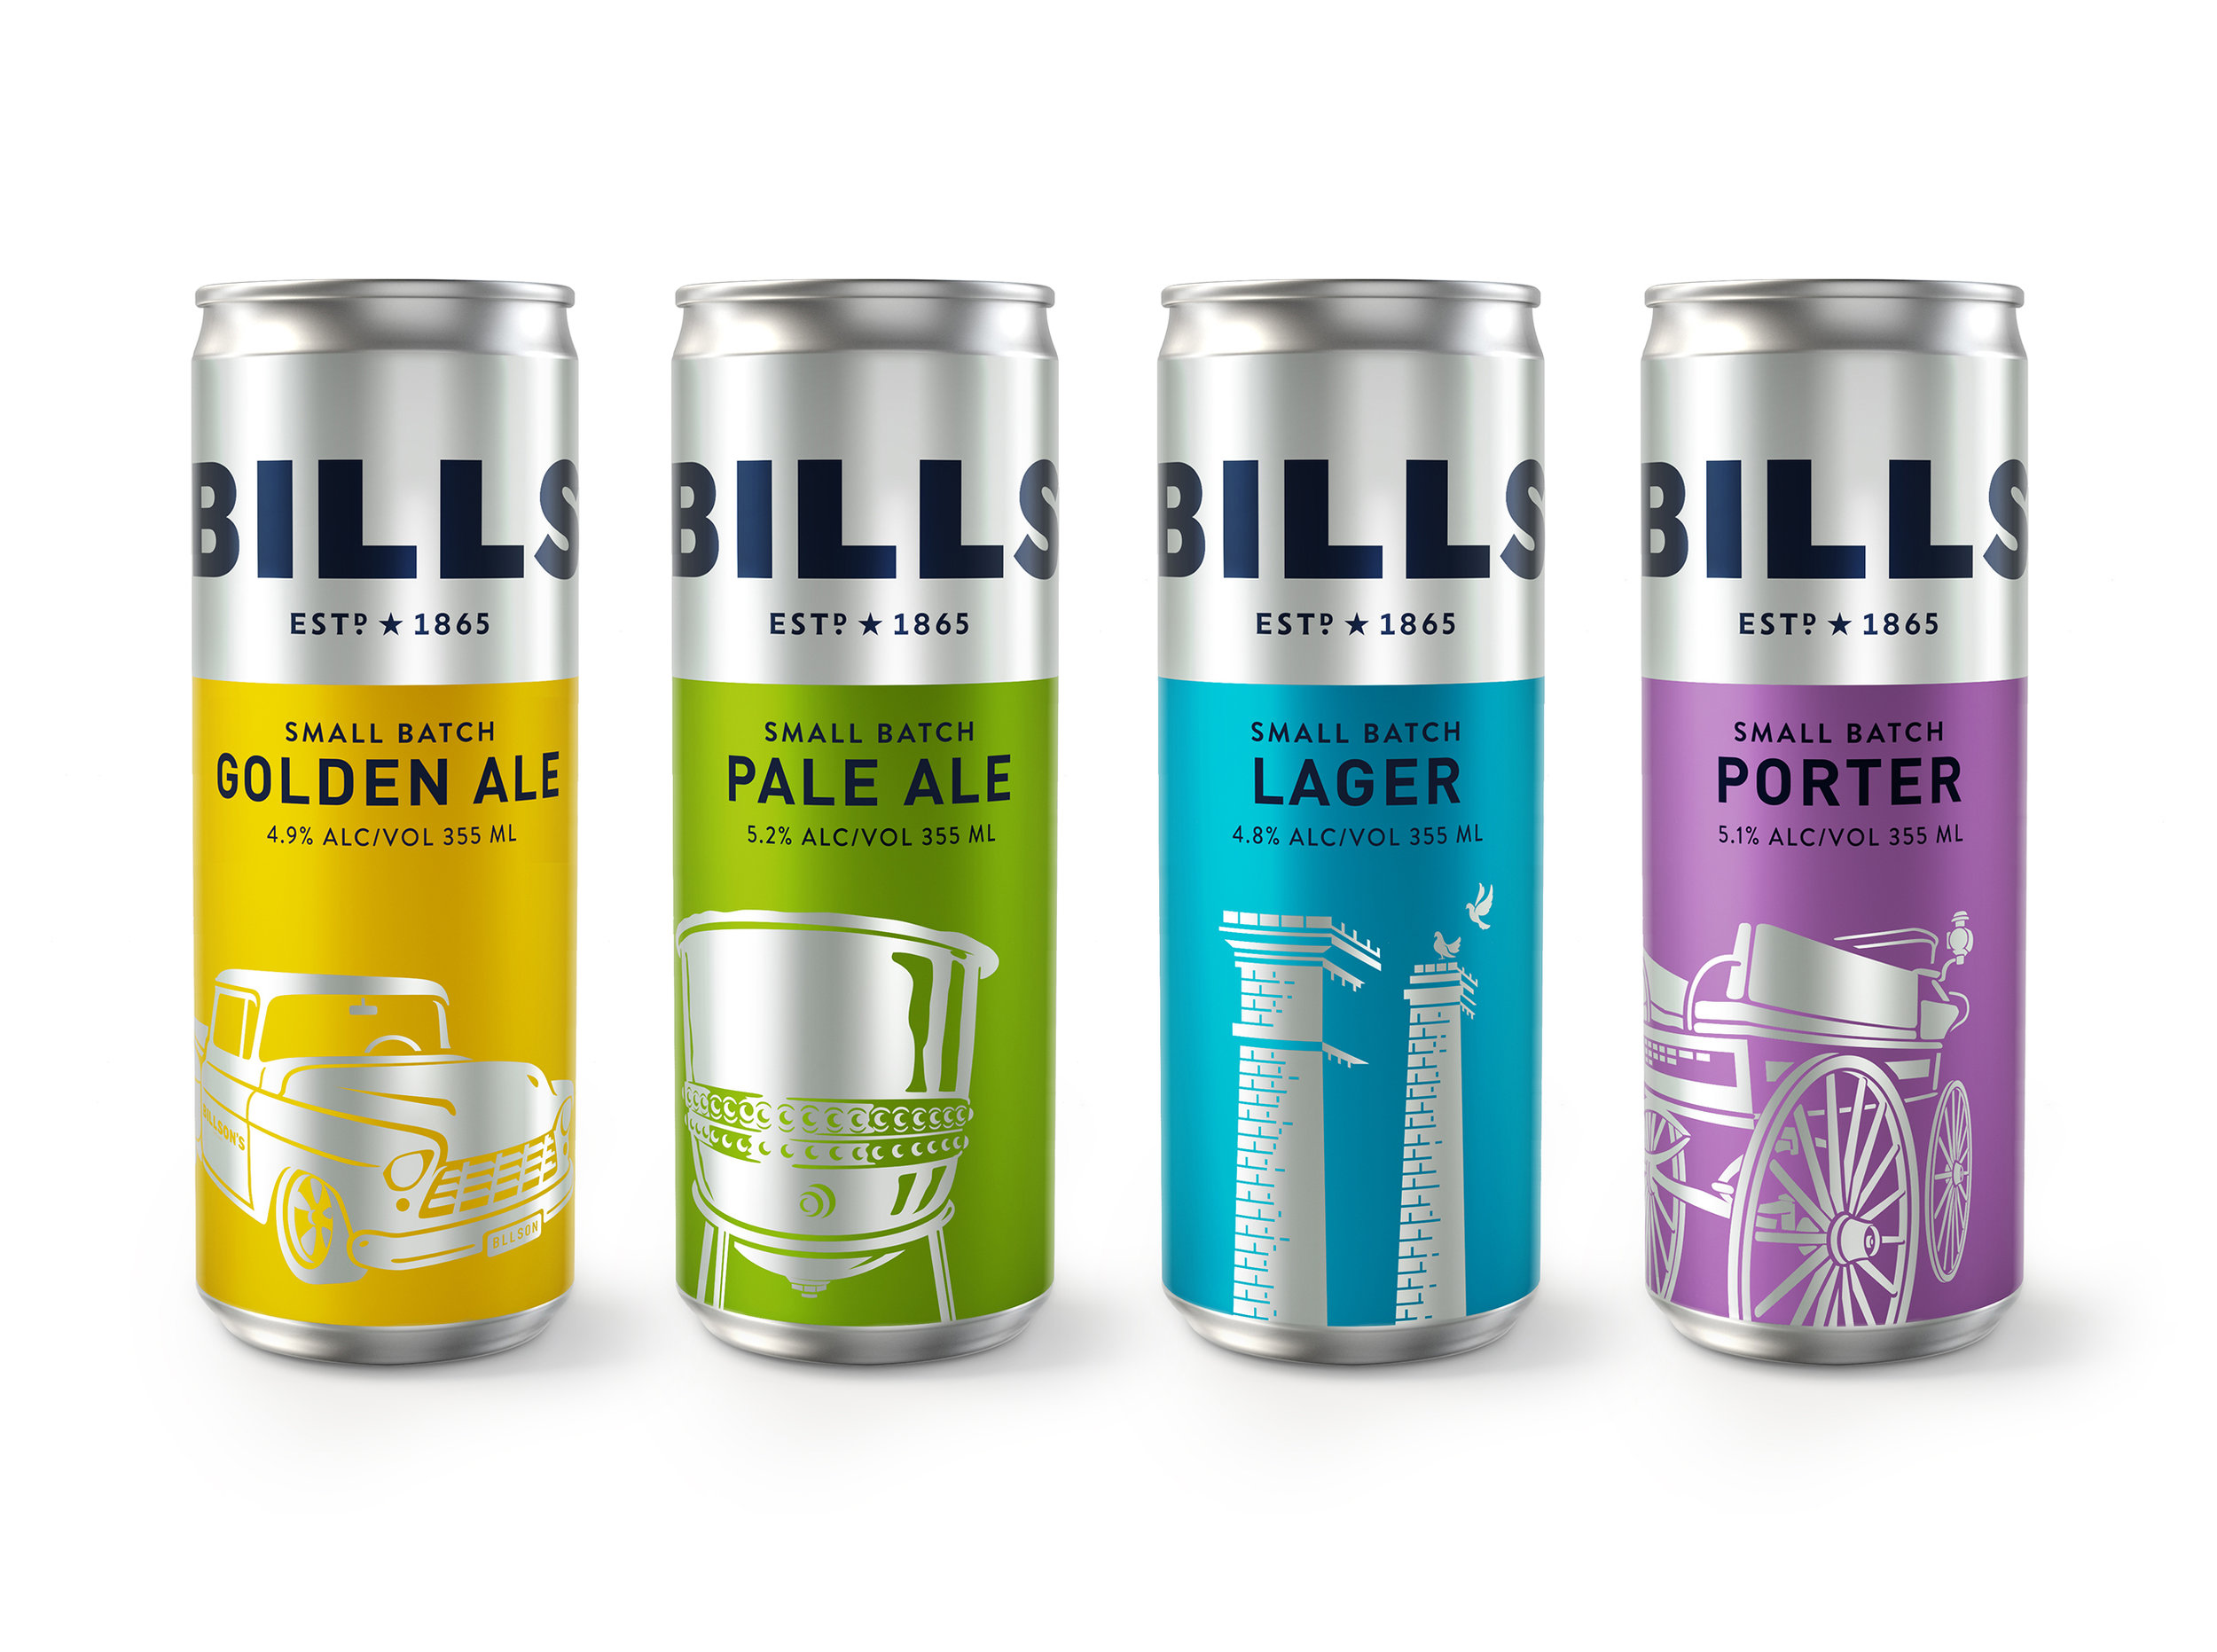 Billson’s Launches First Beers for 70 Years, with Designs by Cowan London